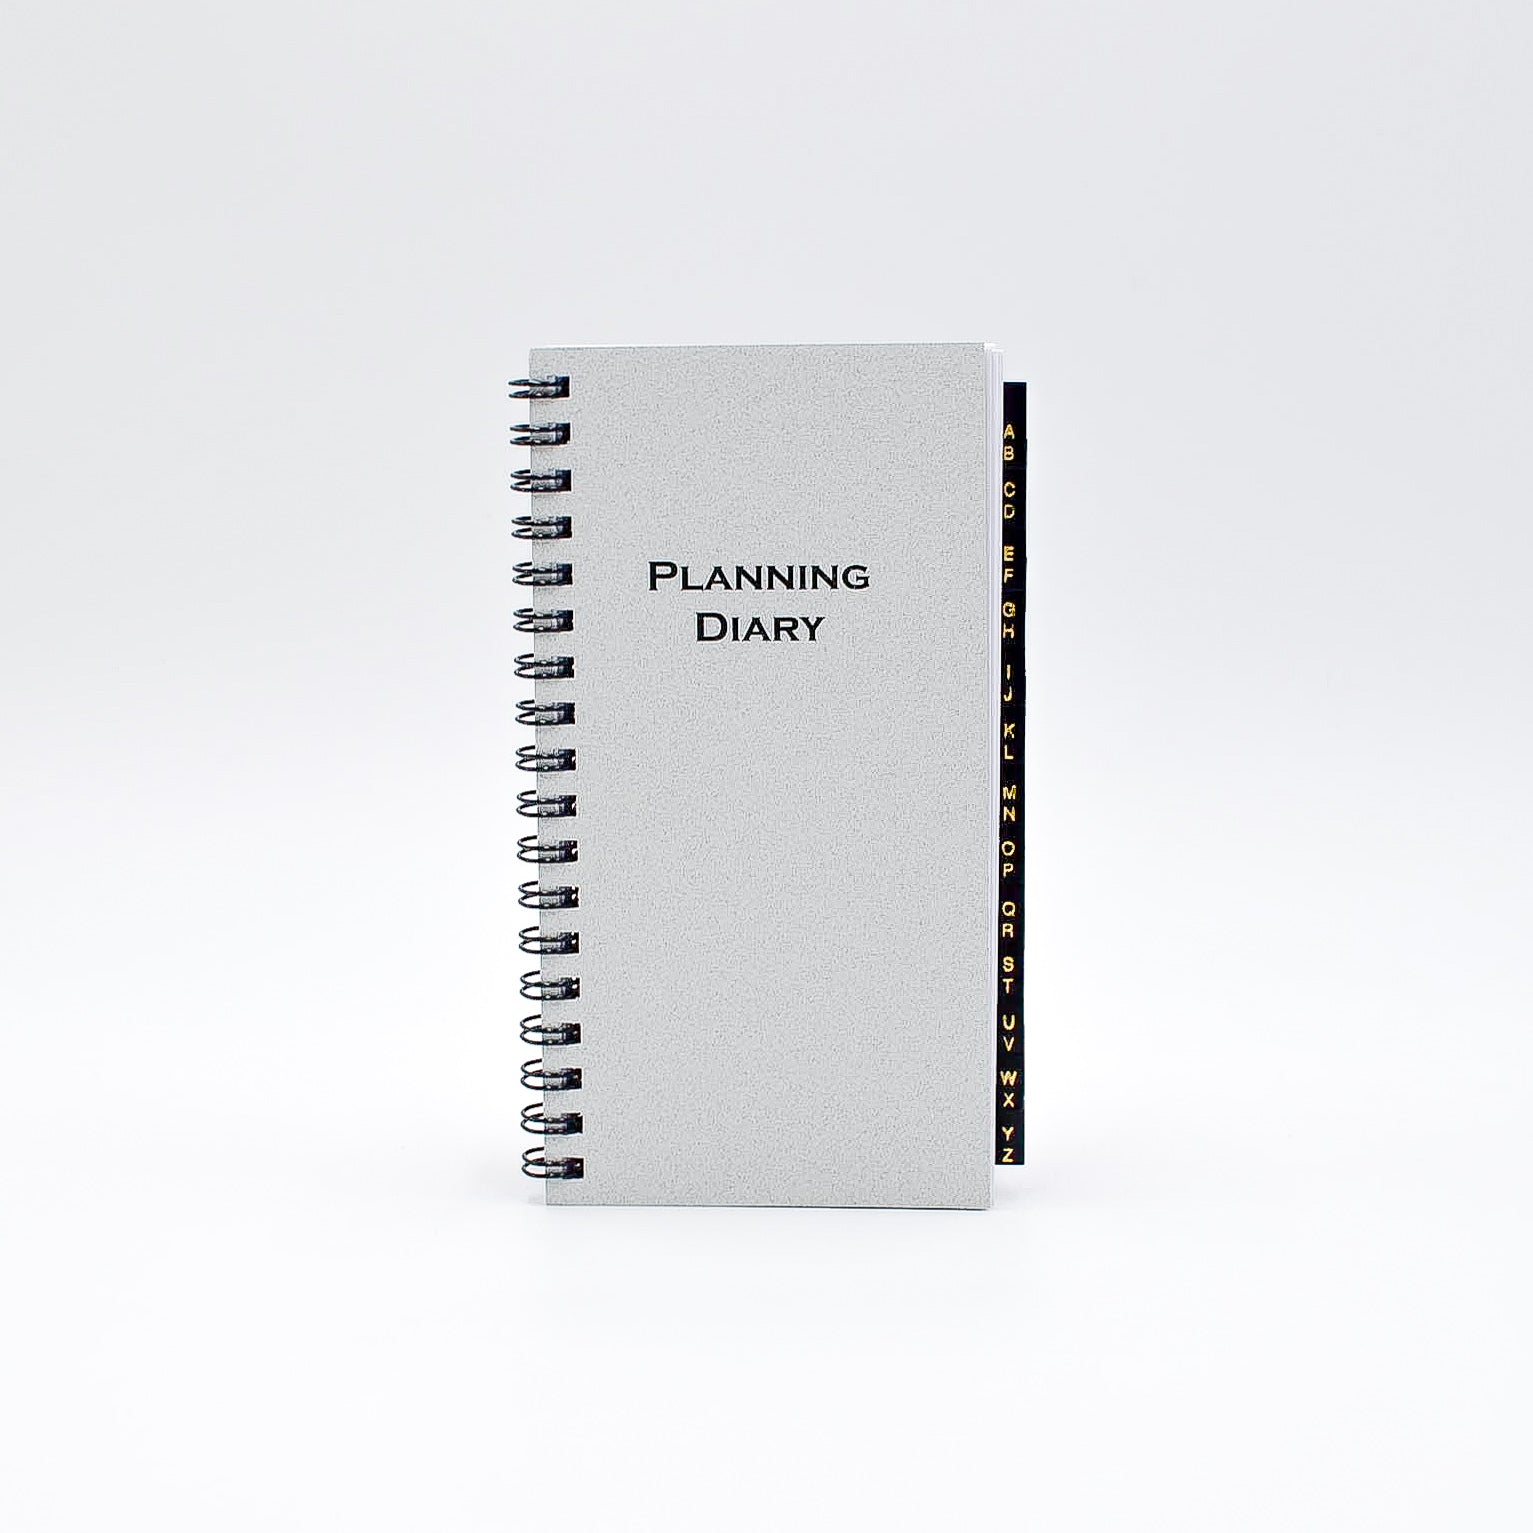 McCarthy Planner- Item MWA36W 12 Month Planner  White paper. Size 6-1/4" x 3-1/4" 144 pages; Weekly and Monthly View Format. One agenda planner; two formats. Also includes a 3 Yearly View, 12 Monthly View, 52 Weekly View. And includes Advance Planning, Important Dates, International Holidays, Birthdays and Anniversaries, Weights and Measures, Weather, Interest Rates, Road and Air Miles...and more!  INCLUDES Address Section with Leatherette Tabs.  Made in the USA!